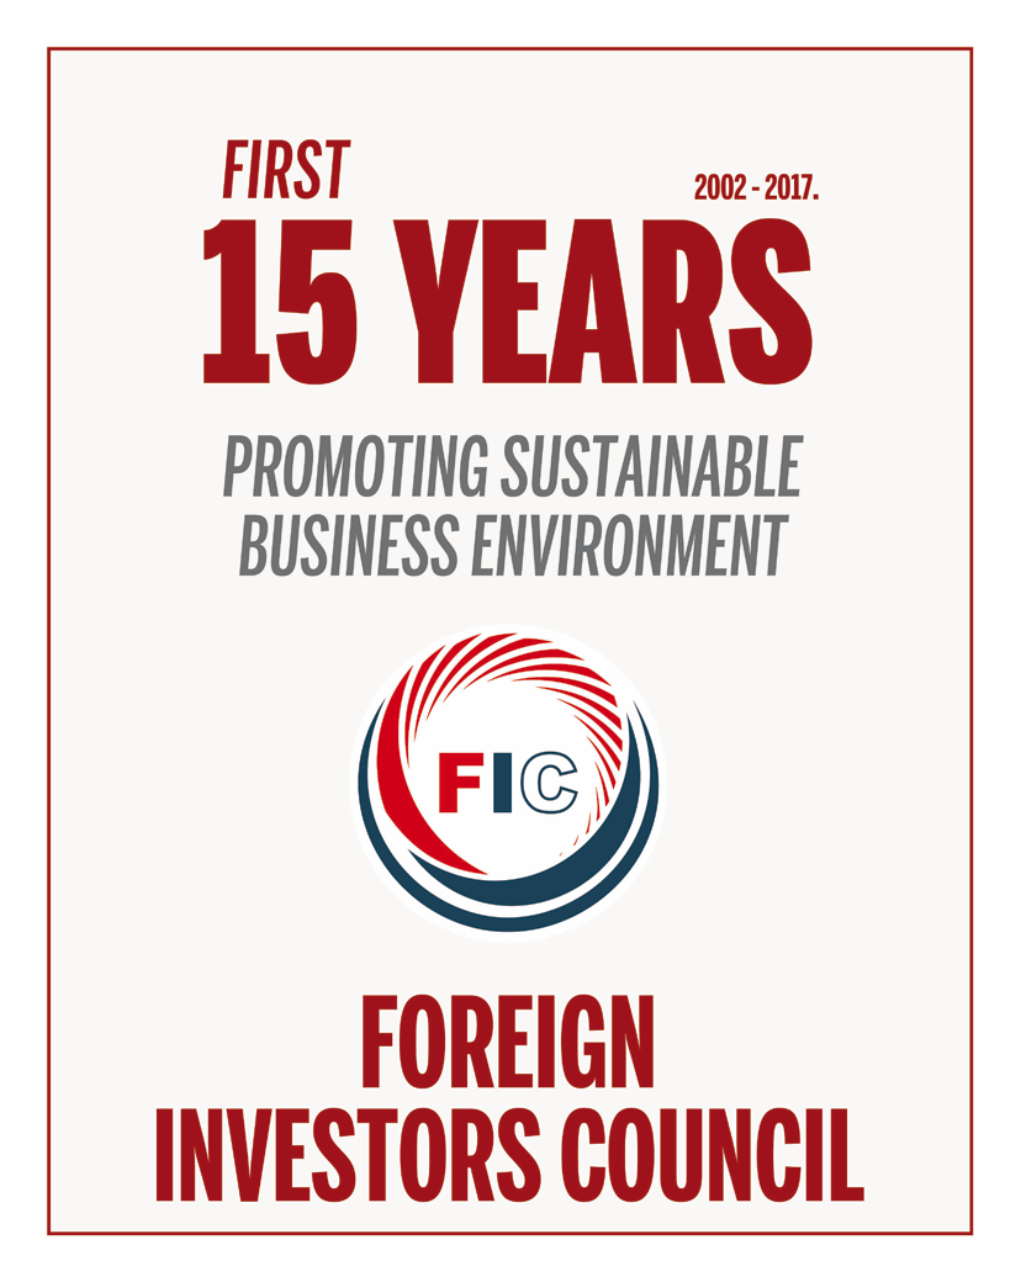 First 15 Years Promoting Sustainable